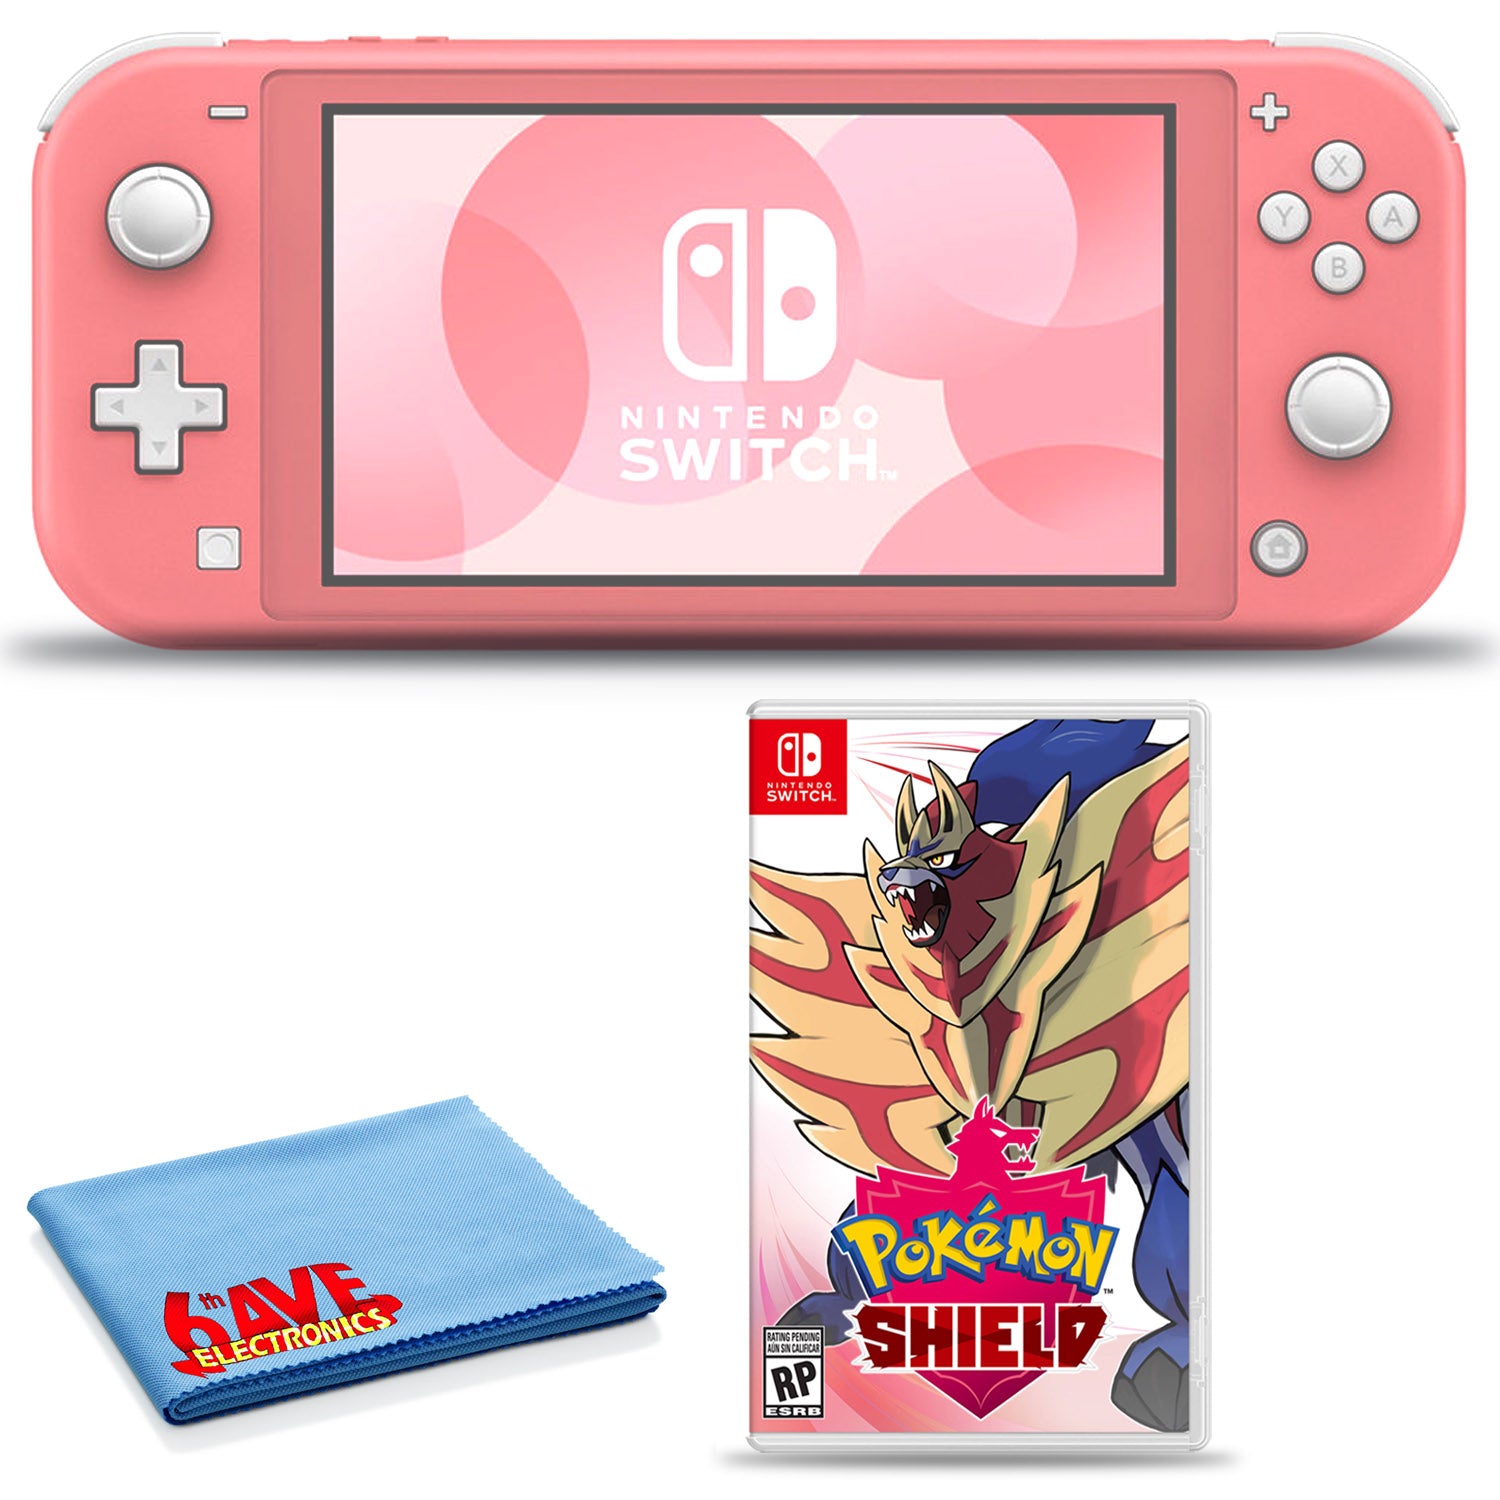 Nintendo Switch Lite (Coral) Bundle with 6Ave Cleaning Cloth and Pokemon Shield